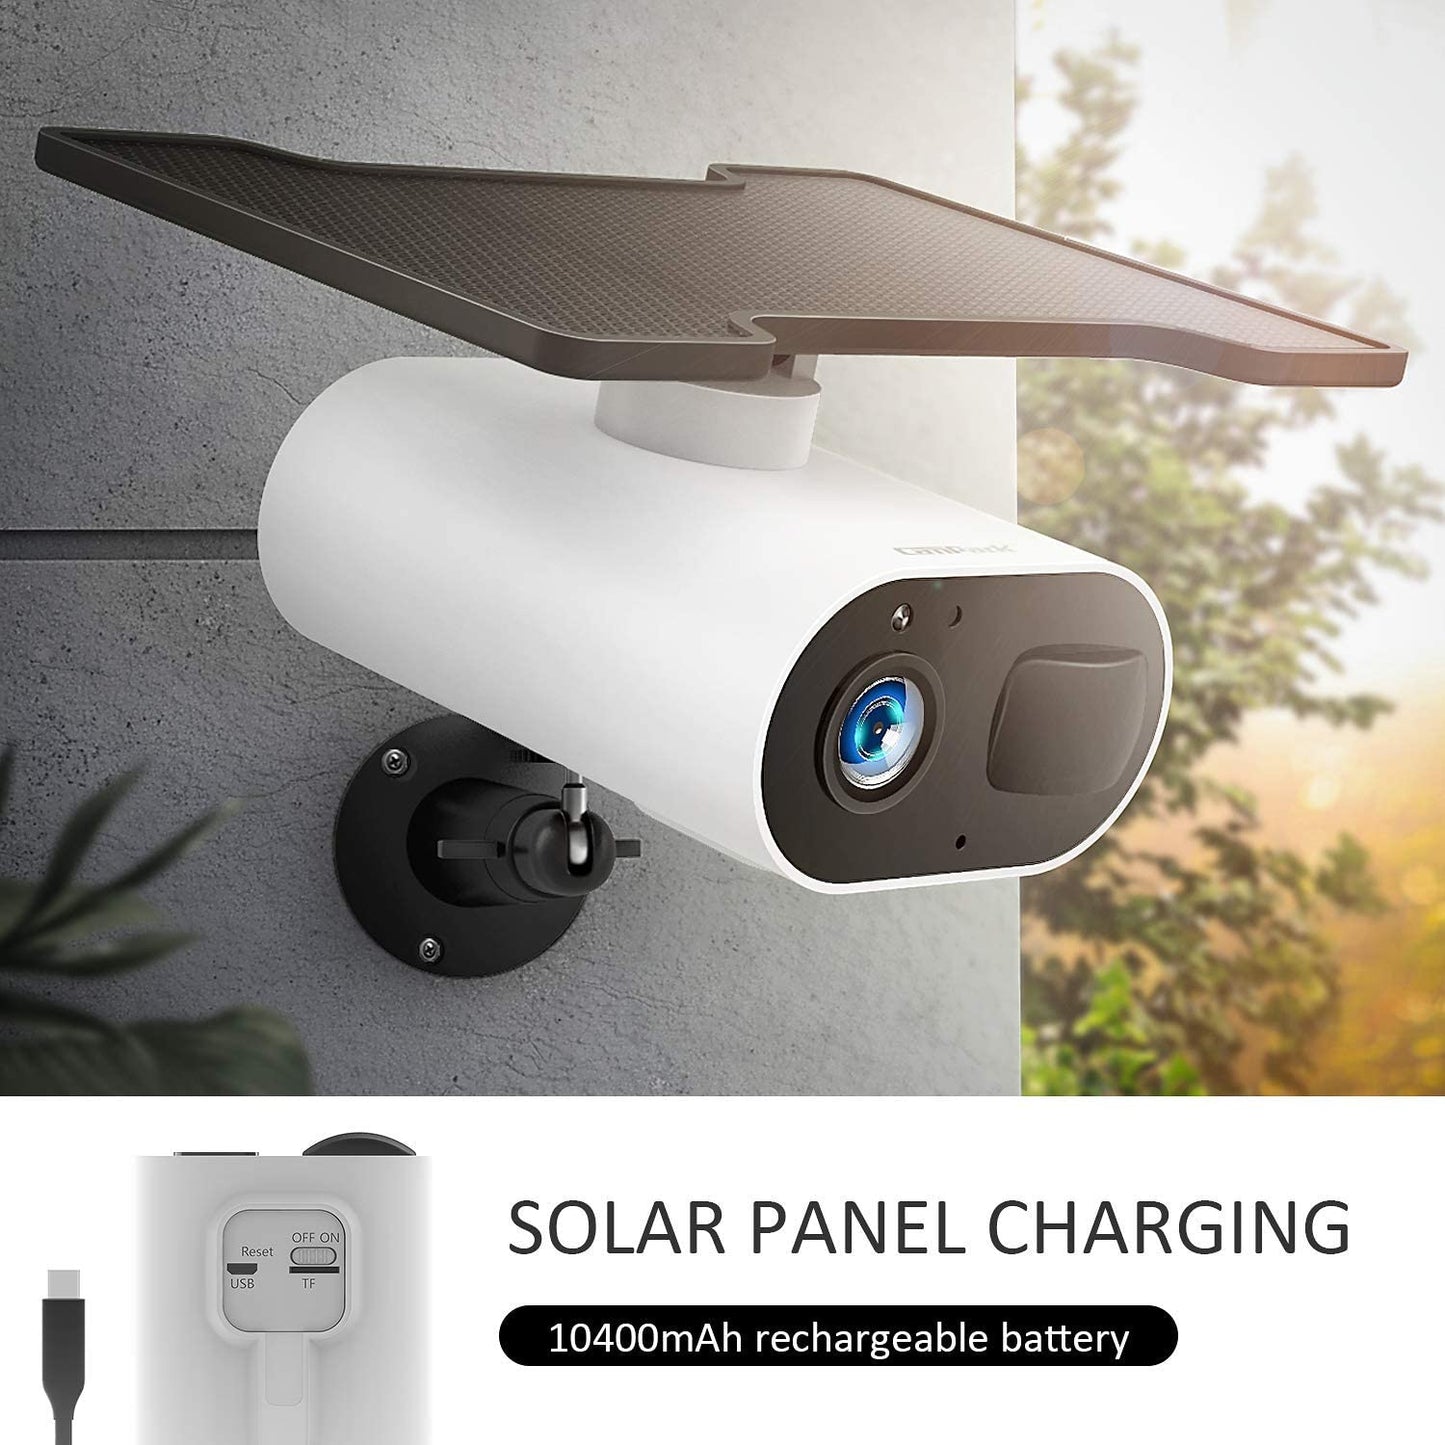 Campark AP25 Solar Wireless IP Home Security Camera Outdoor 1080P WiFi Camera with PIR Motion